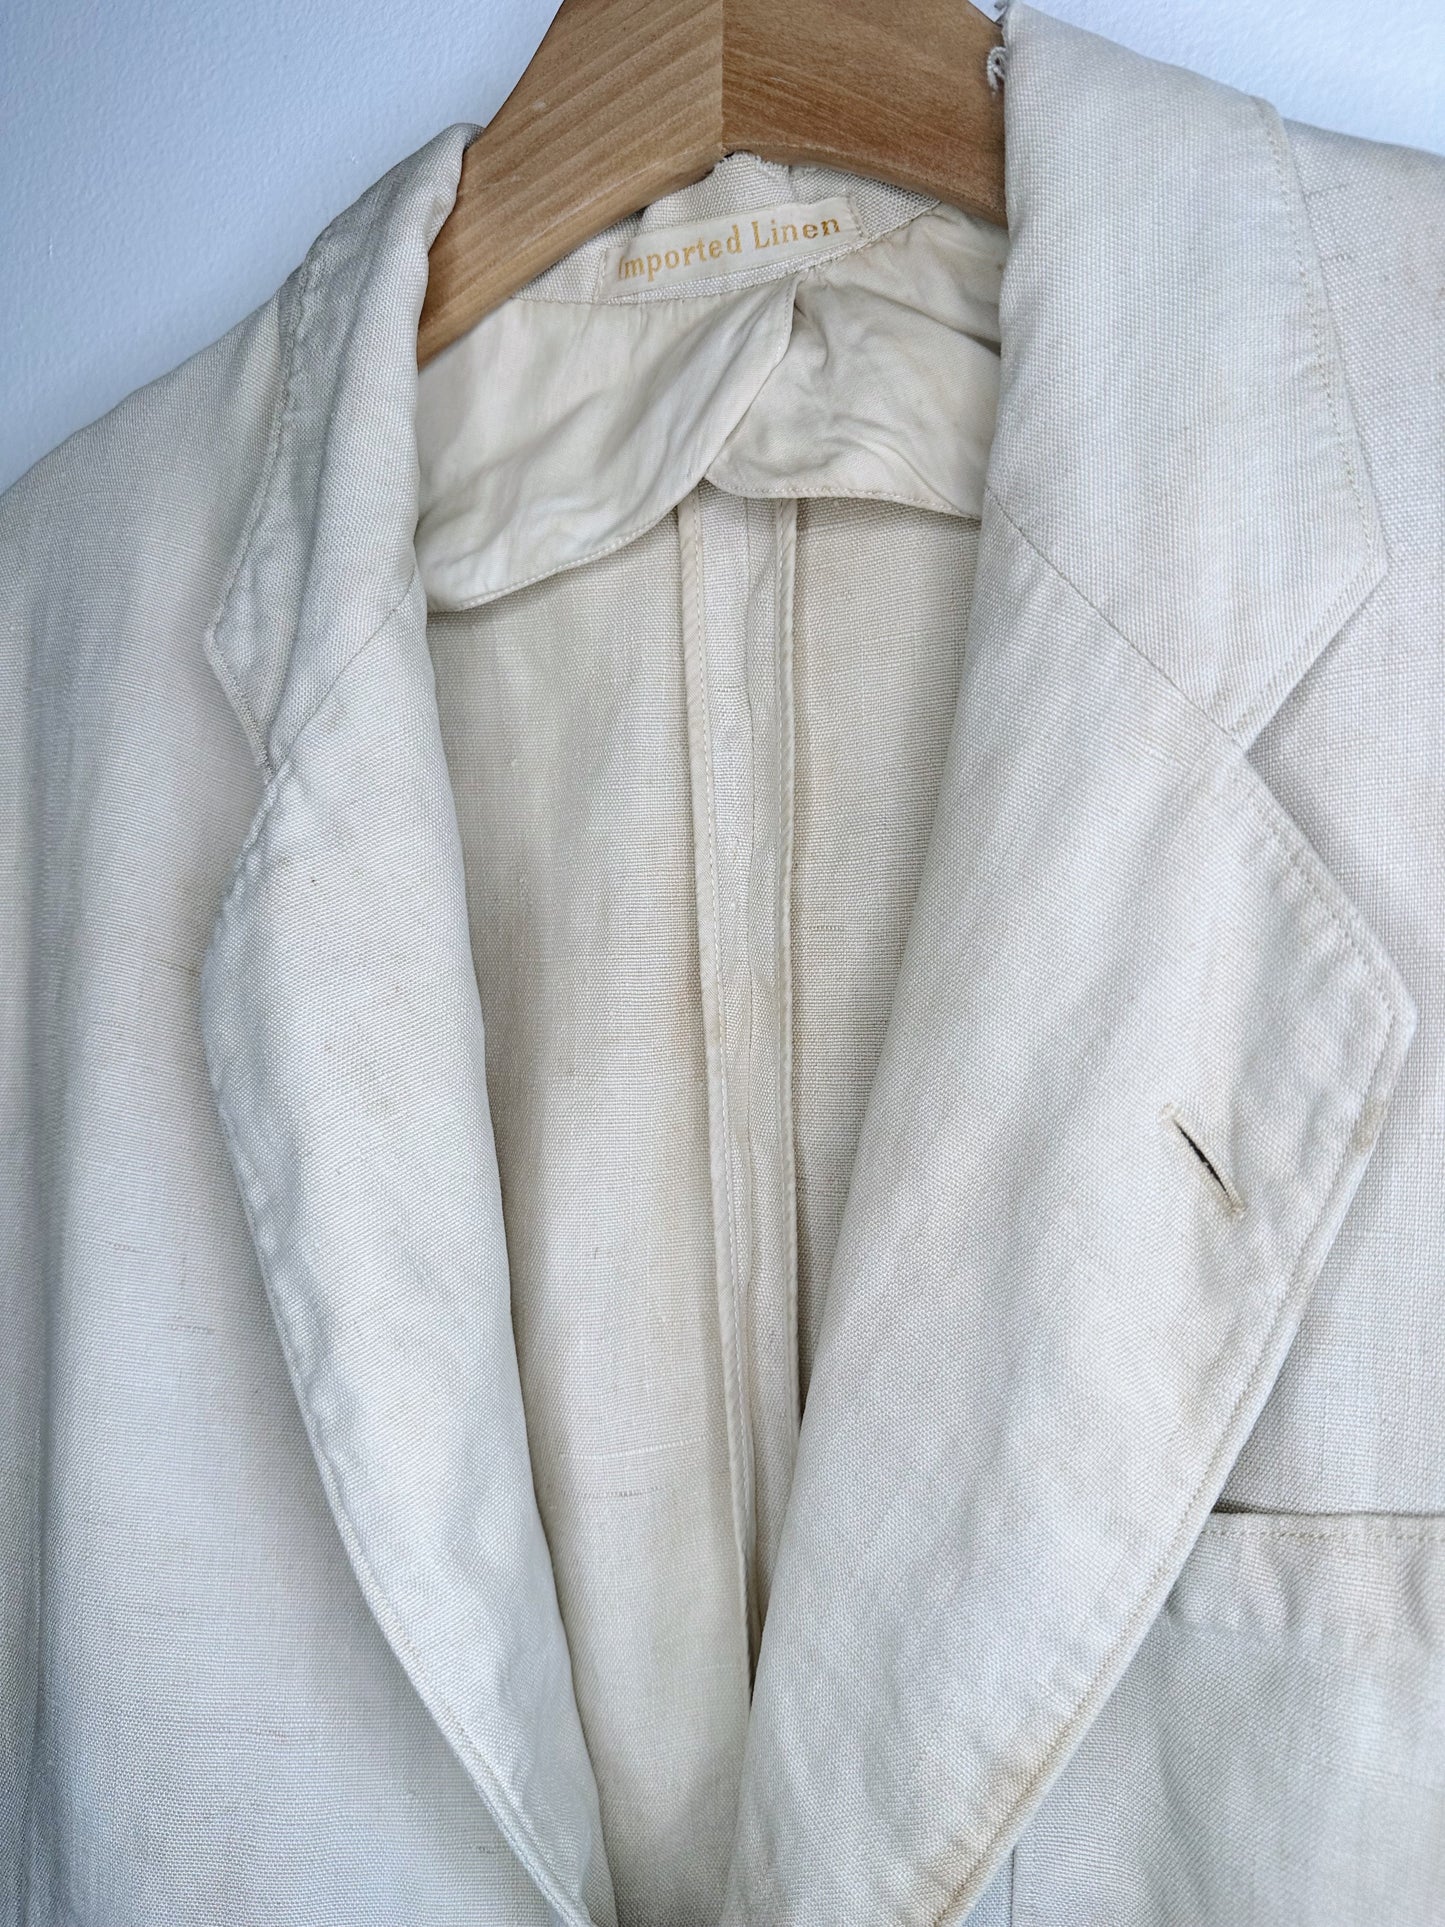 view of tag - imported linen 